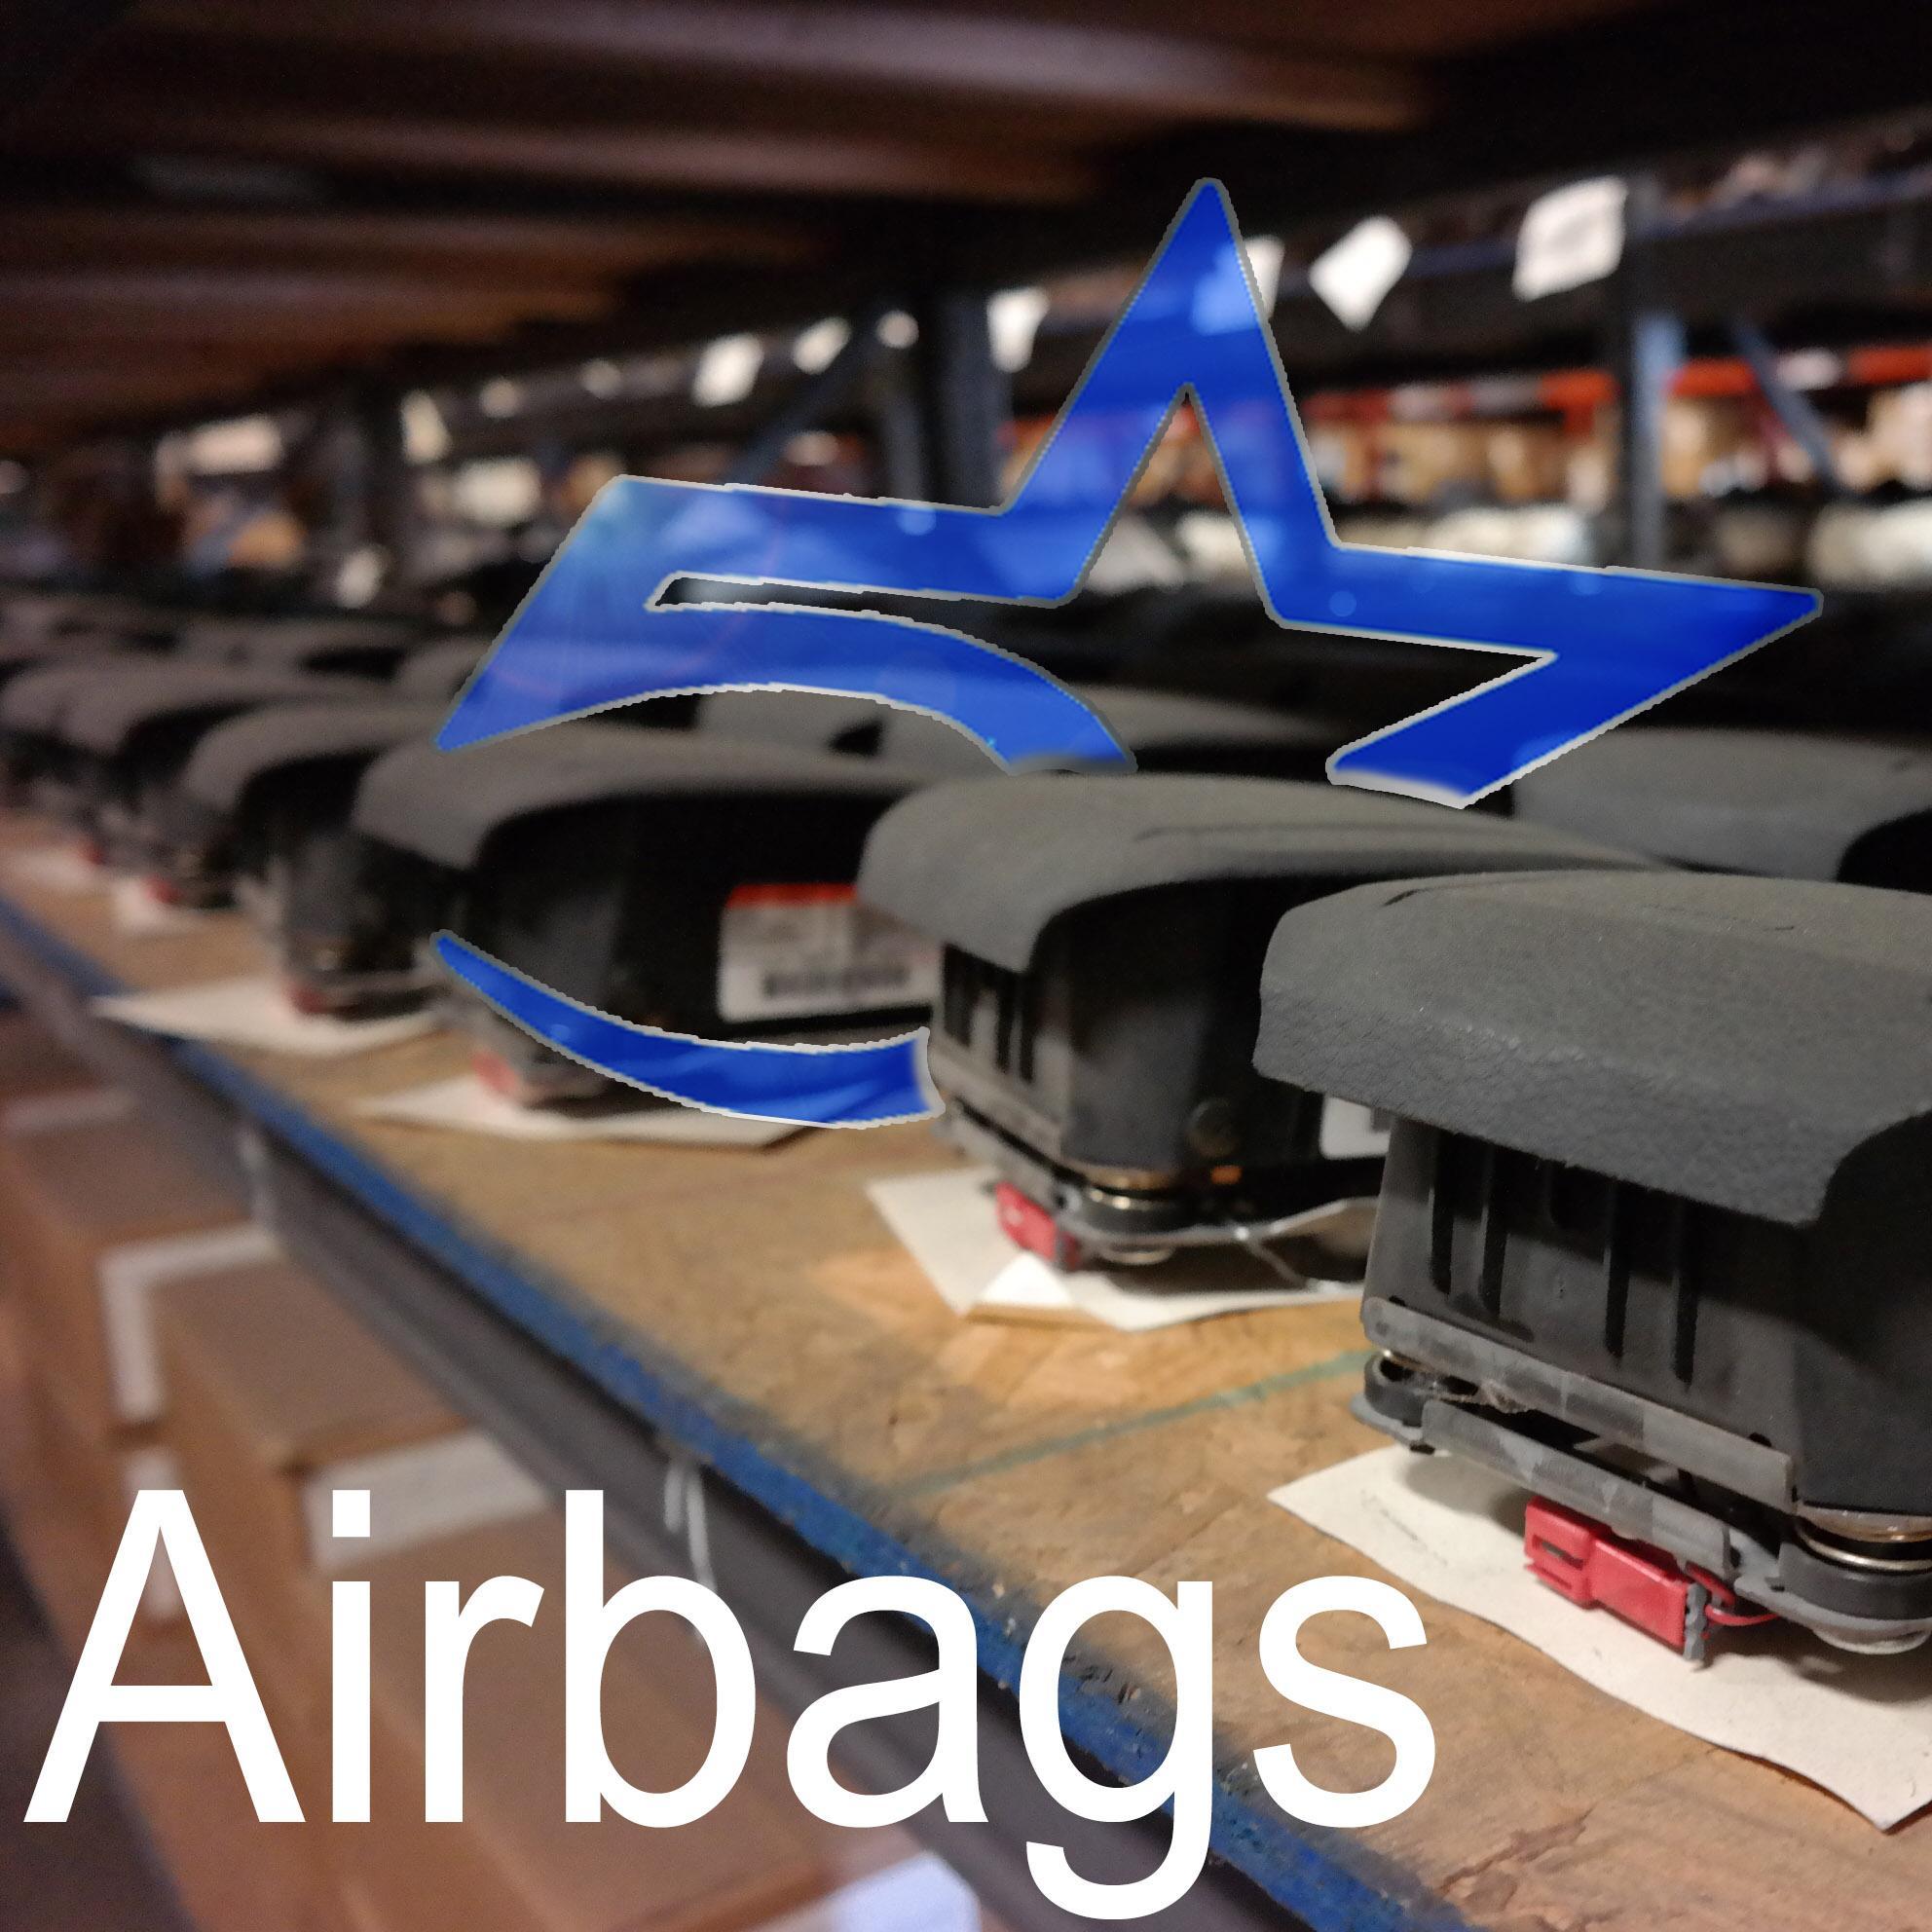 We have the best Airbags for the best prices!